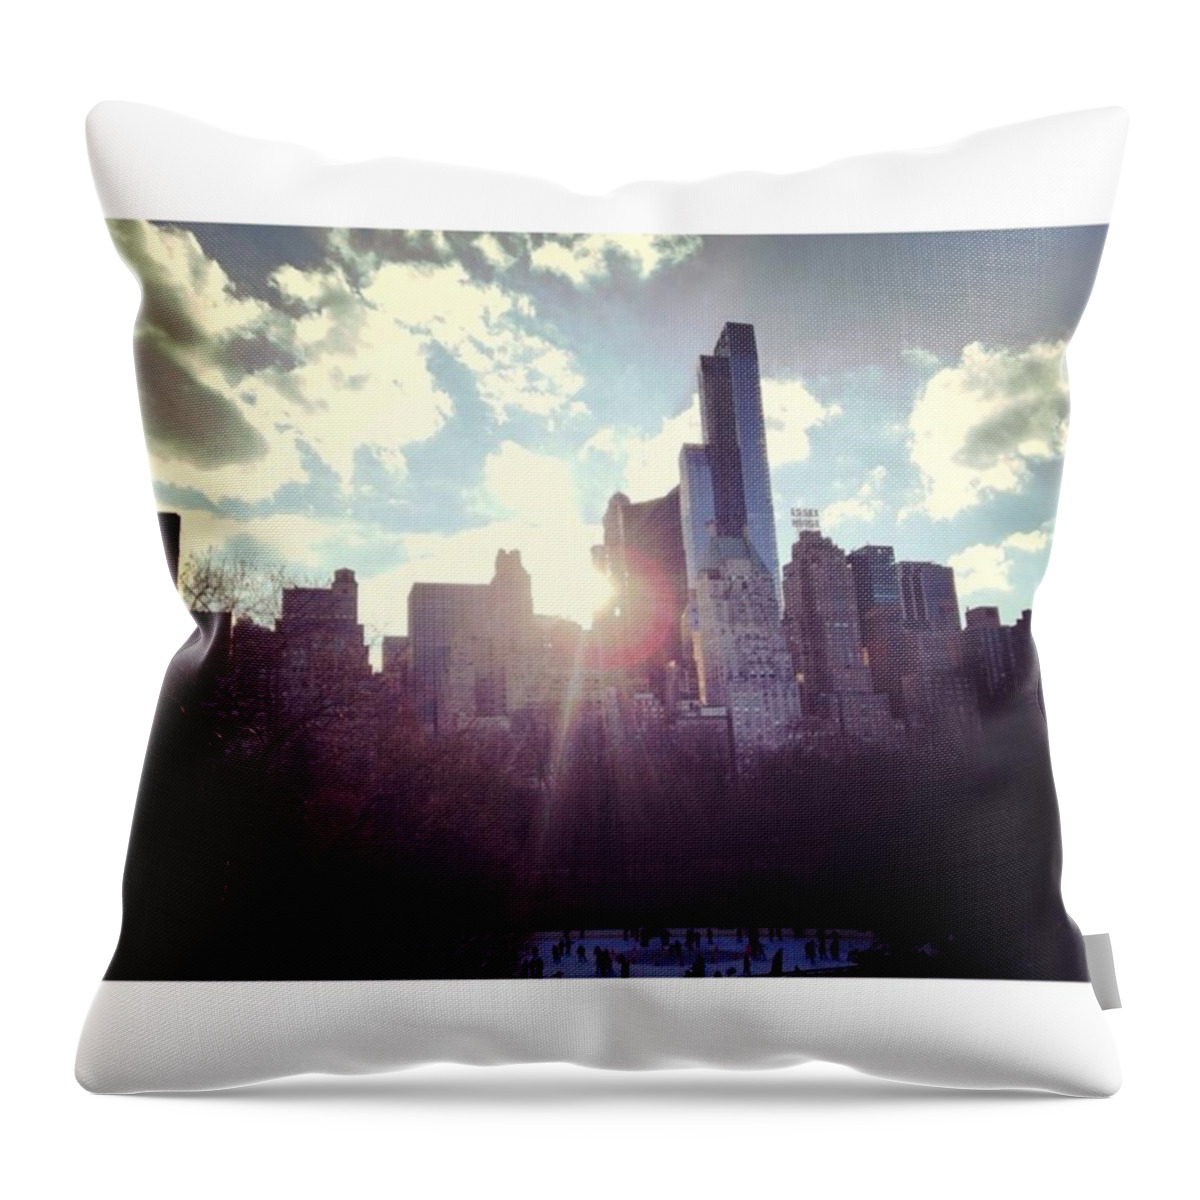 Nyc Throw Pillow featuring the photograph Strolling Around Central Park by Sarah